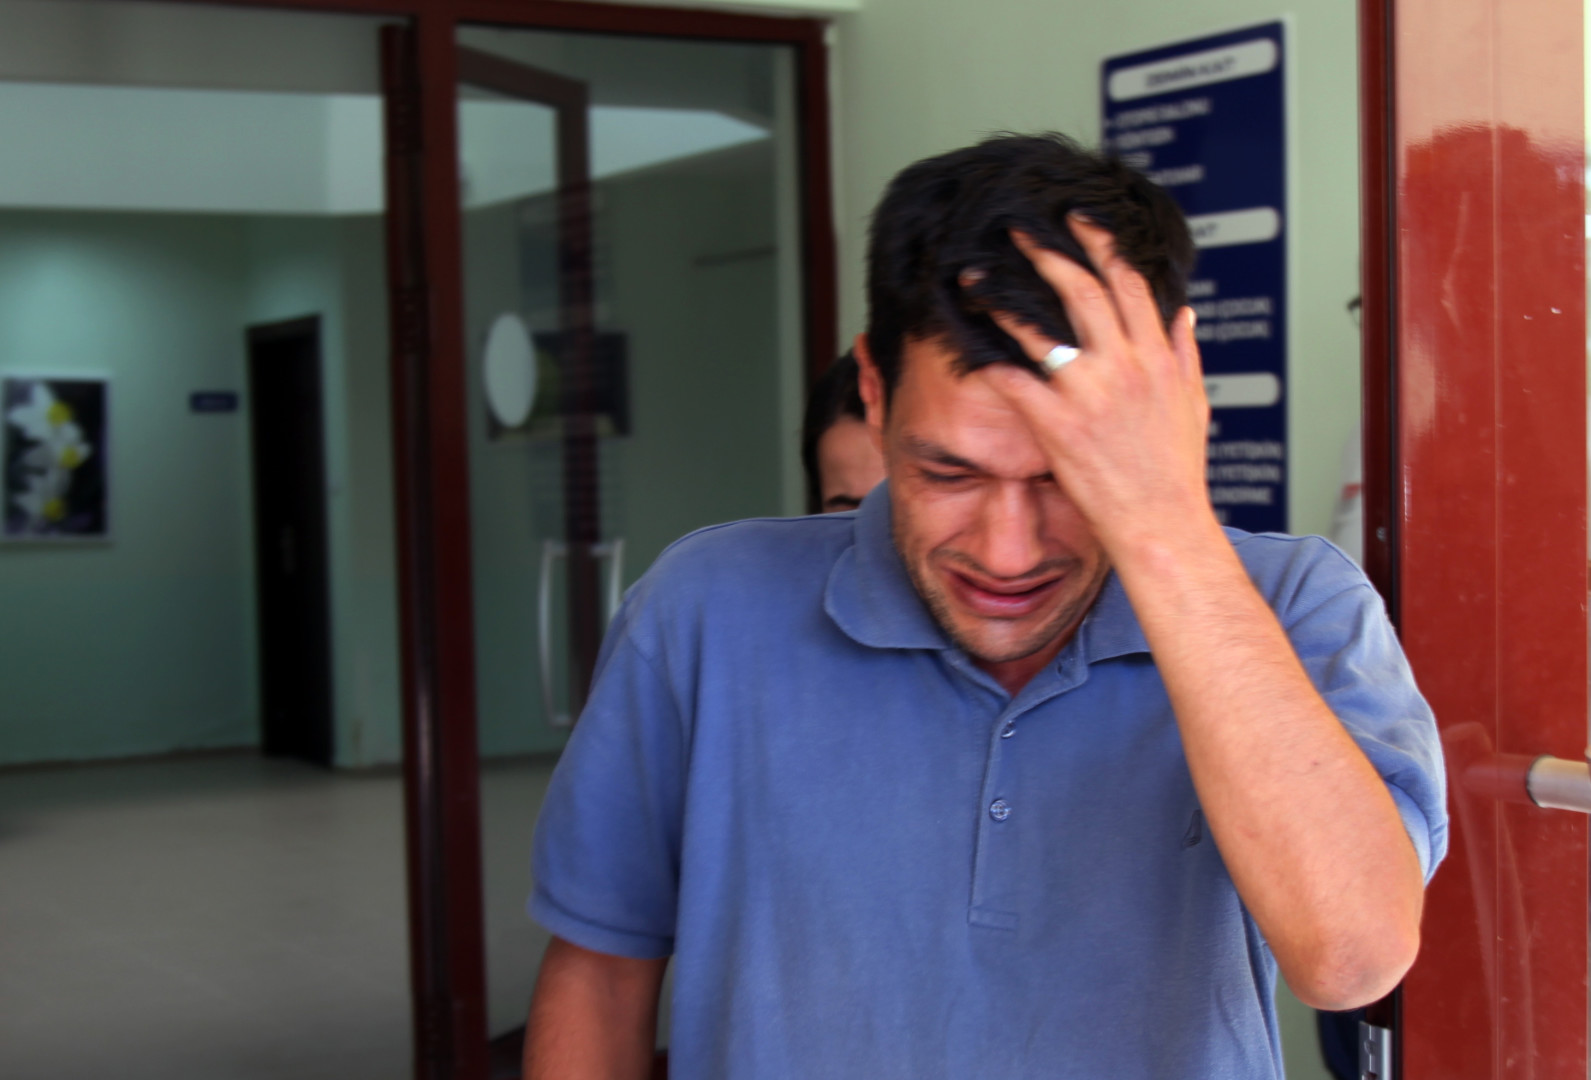 Abdullah Kurdi, 40, father of Syrian boys Aylan, 3, and Galip, 5, who were washed up drowned on a beach near Turkish resort of Bodrum on Wednesday, cries as he waits for the delivery of their bodies outside a morgue in Mugla, Turkey, Thursday, Sept. 3, 2015.(AP Photo/Mehmet Can Meral)